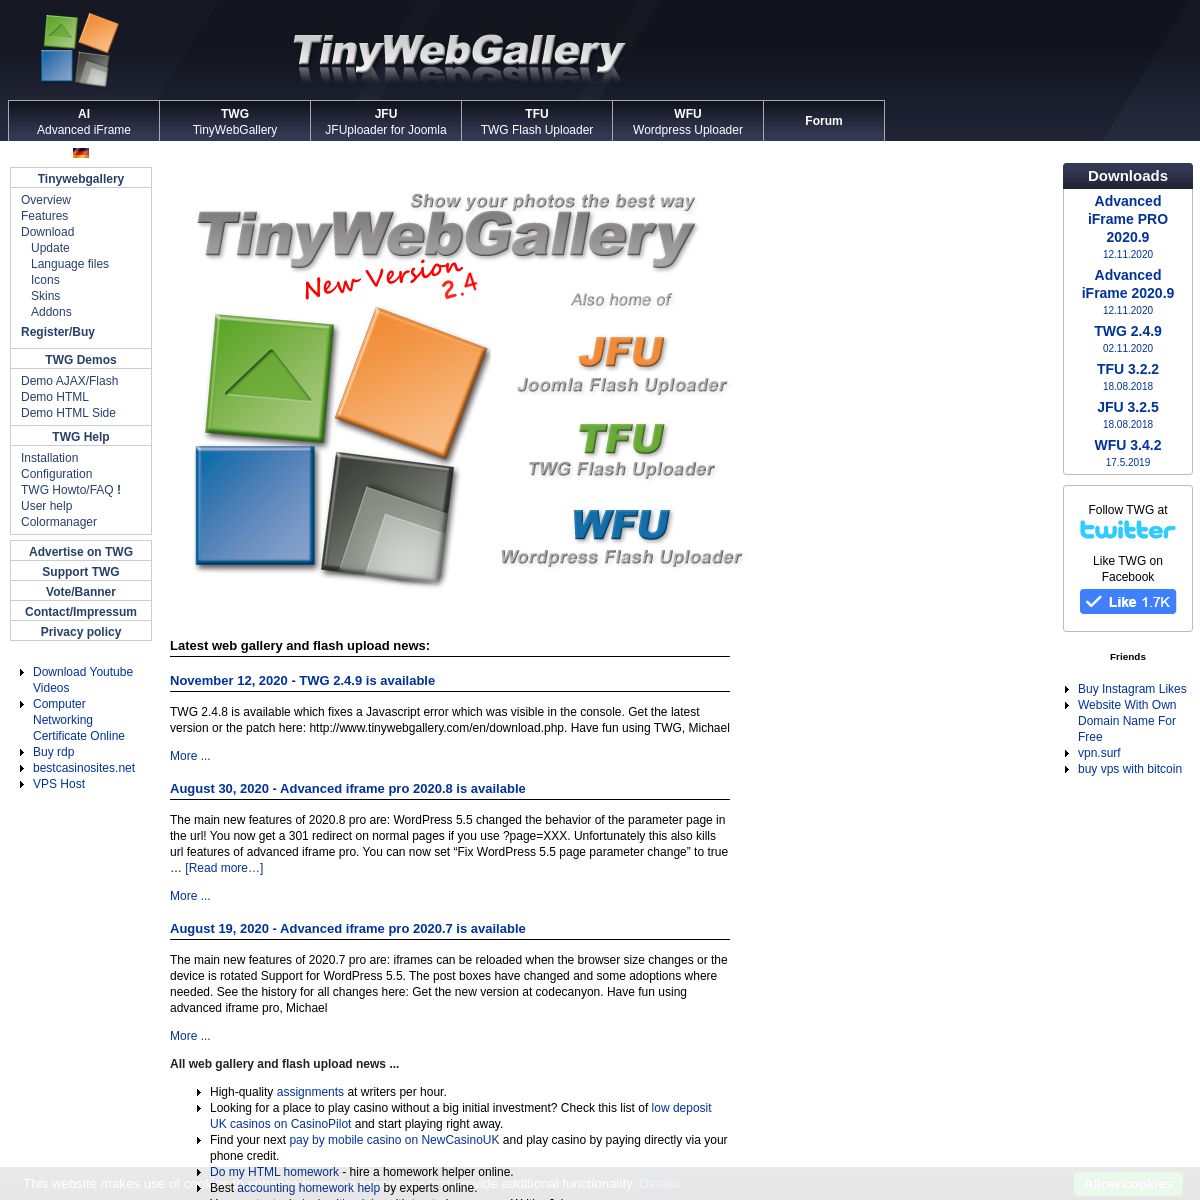 A complete backup of tinywebgallery.com